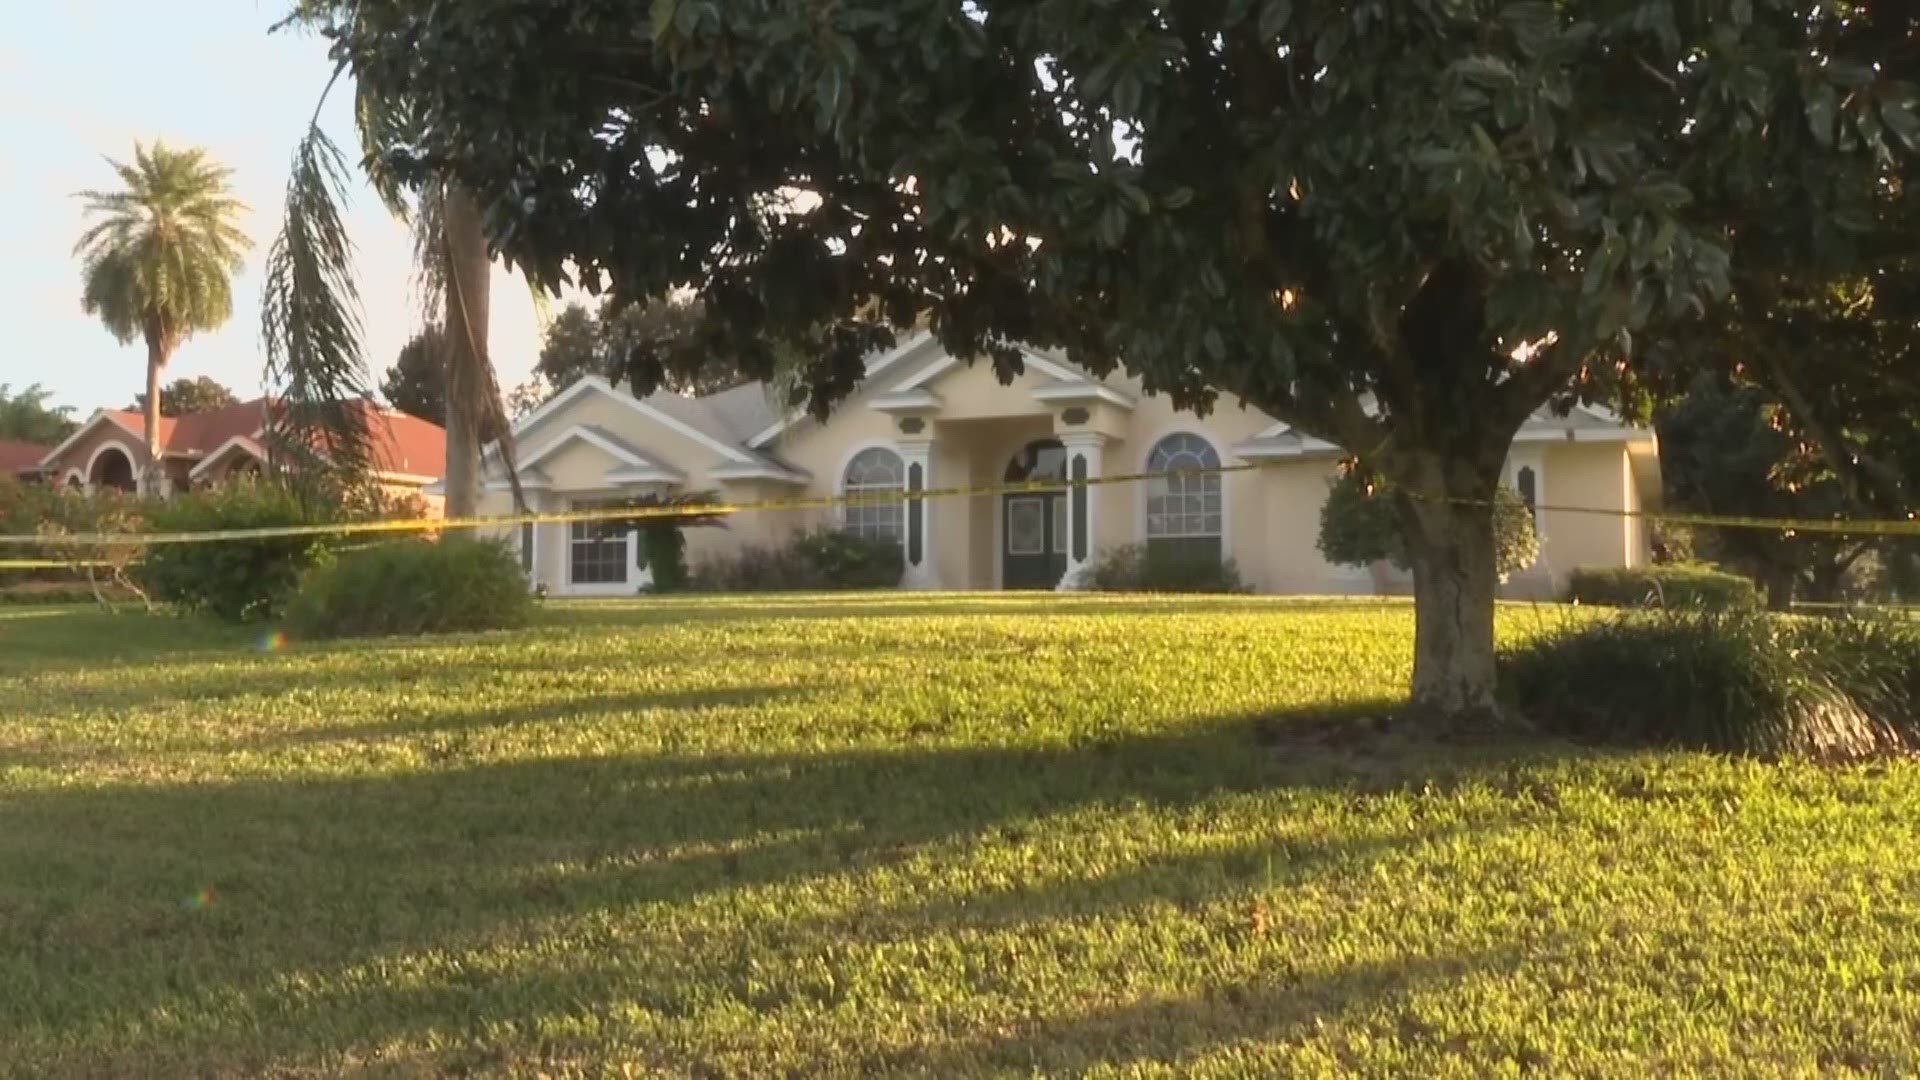 Deputies say a woman killed her husband and her adult son with special needs before killing herself in Clermont, Florida.